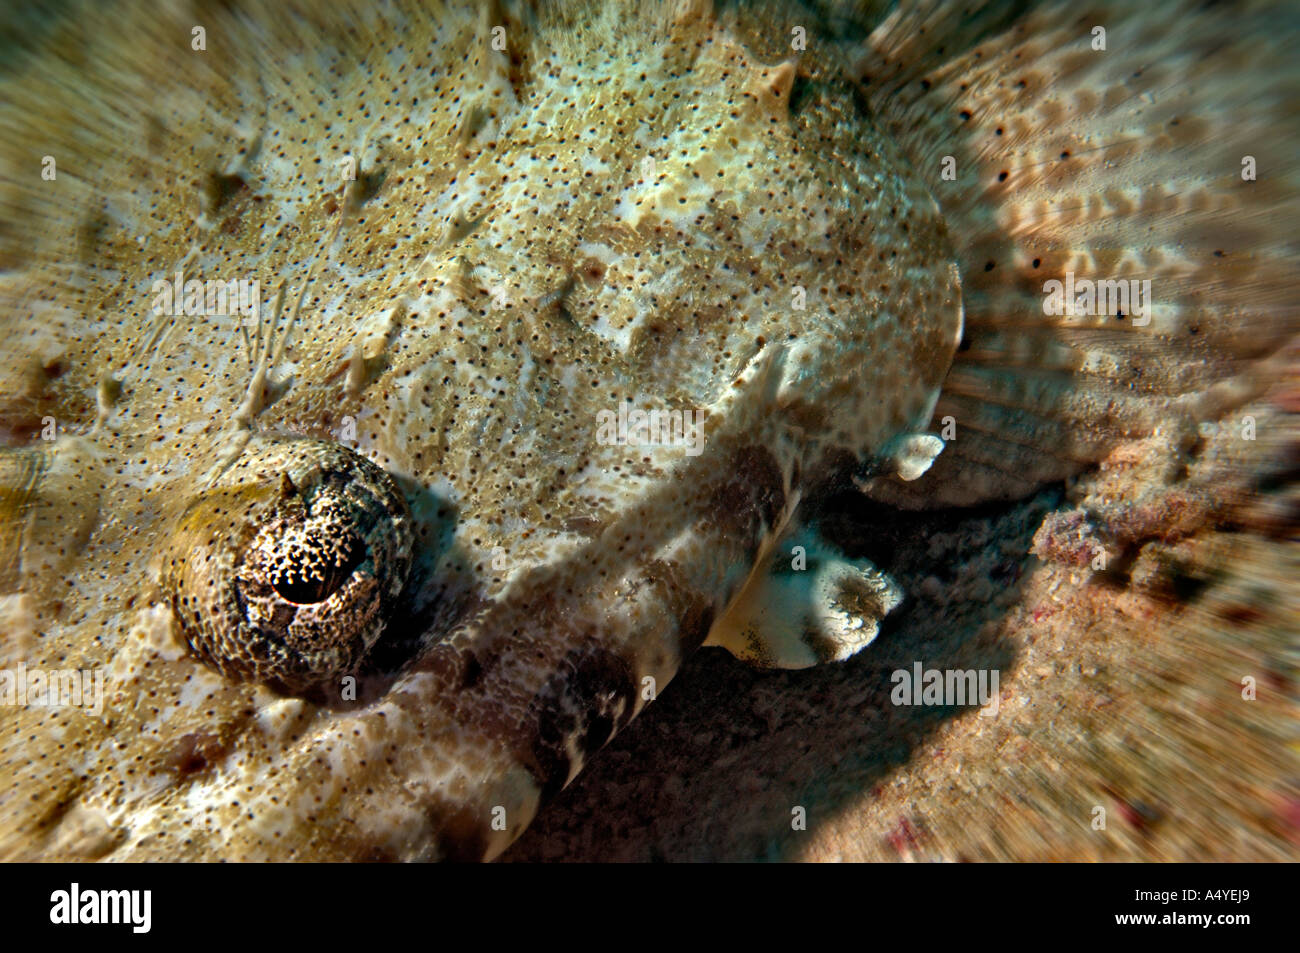 Middle East Egypt Red Sea, Eye of Spotted Flathead, Papilloculiceps longiceps Stock Photo